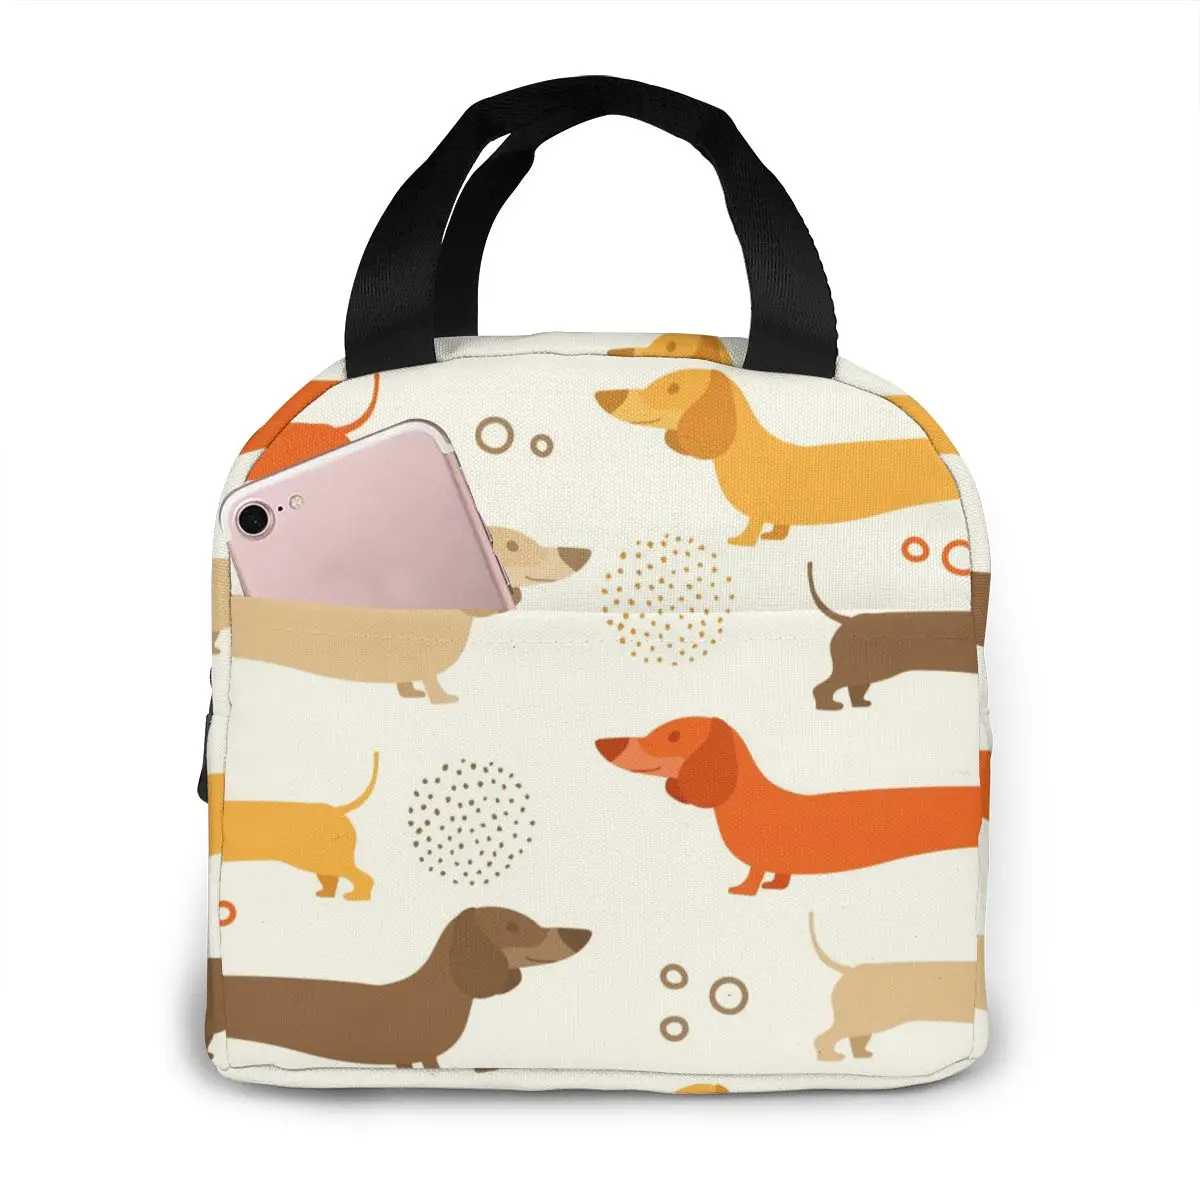 

Insulated Lunch Bag Cute Dachshound Thermal Tote Bags Cooler Picnic Food Lunch Box Bag for Women Teens Kids Work School